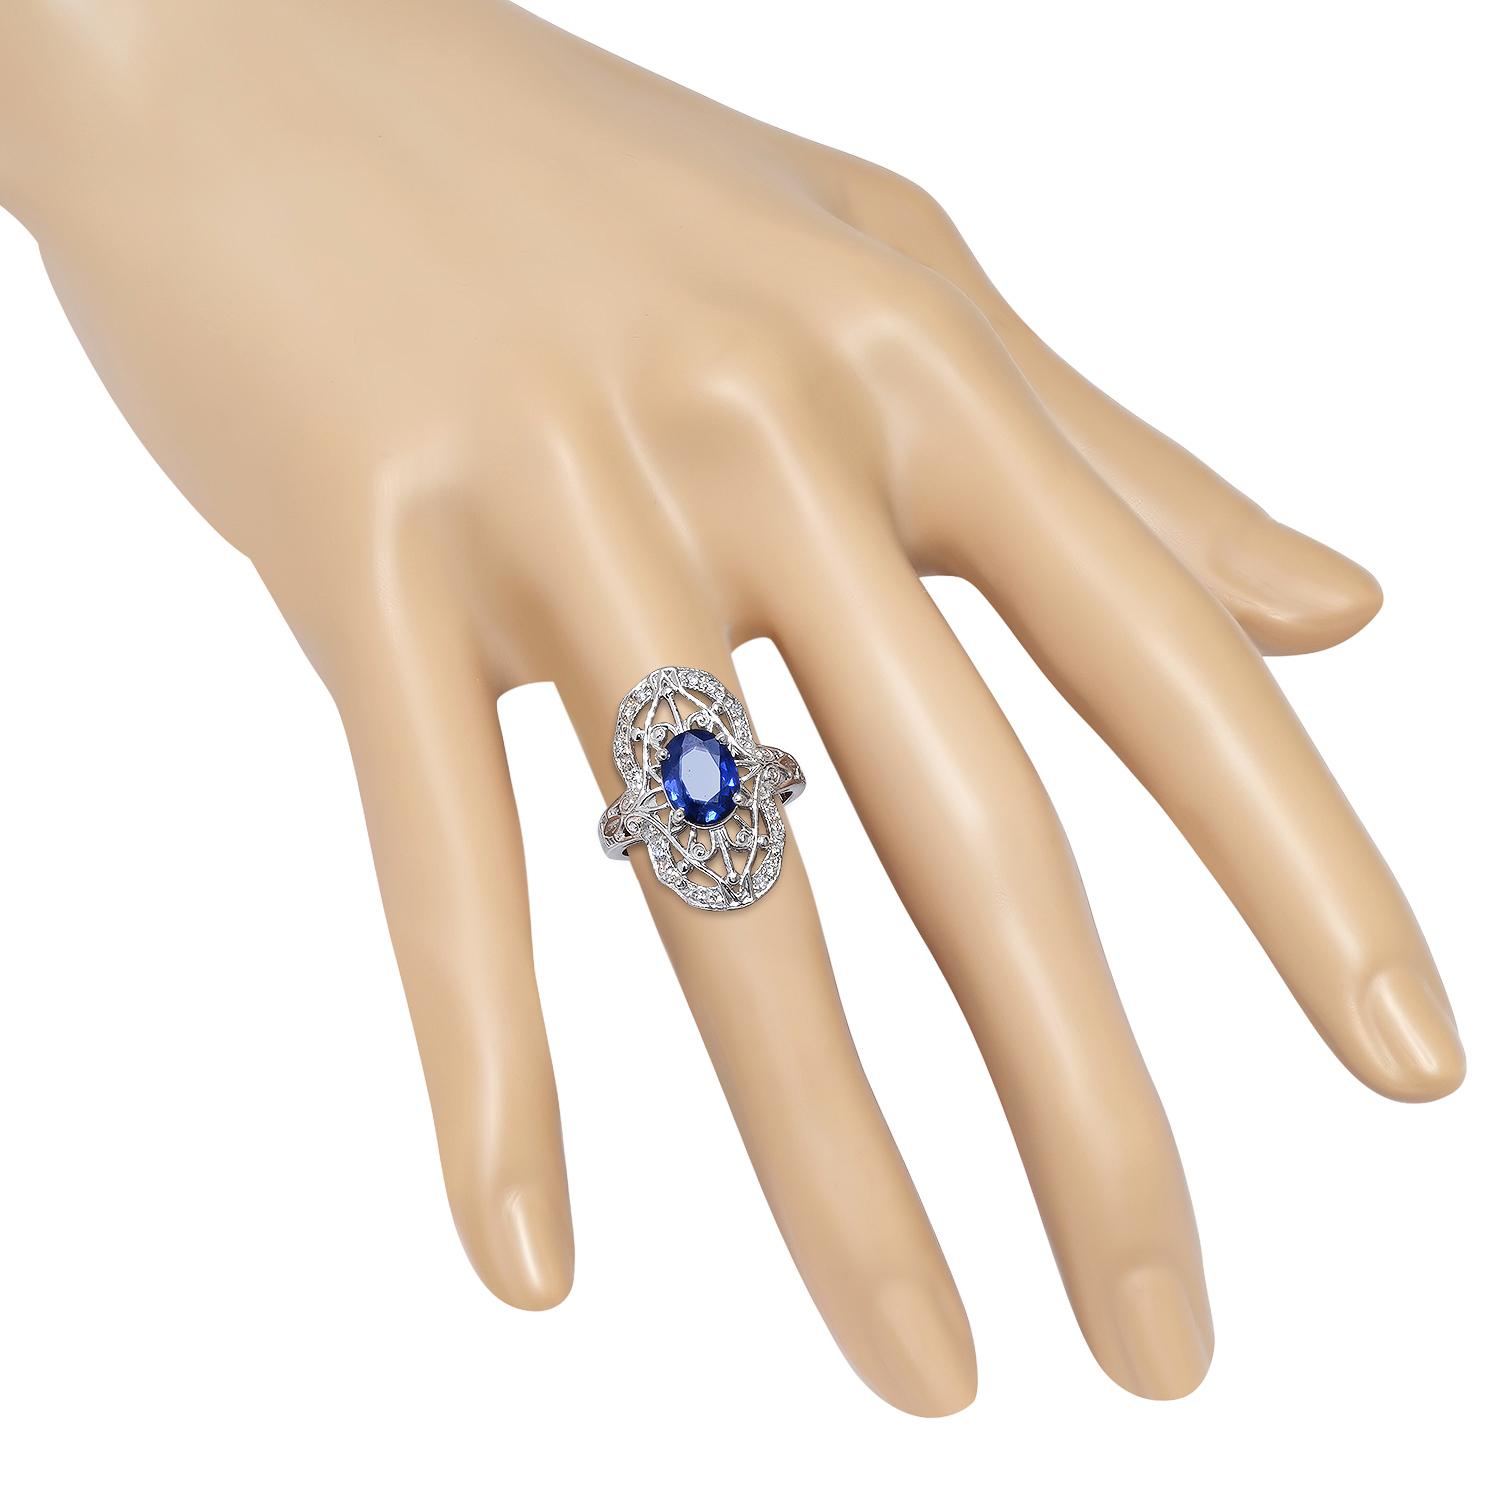 18K White Gold Setting with 1.82ct Sapphire and 0.15ct Diamond Ladies Ring